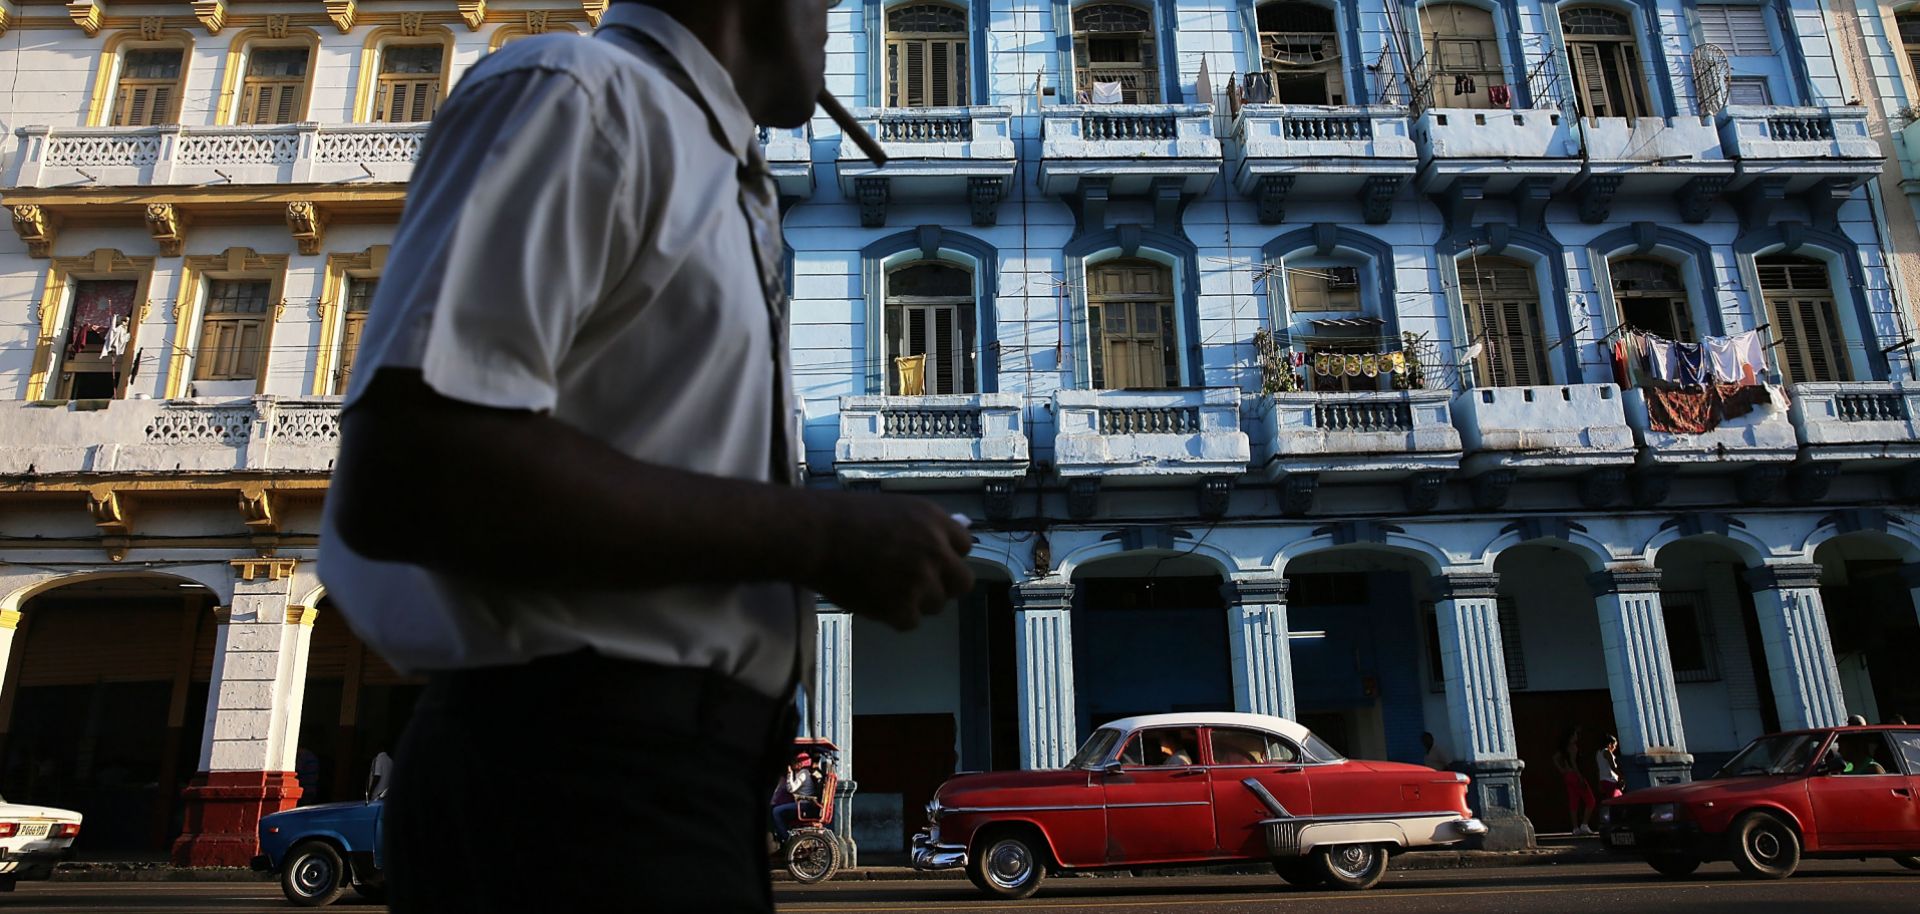 Car ownership in Cuba lags behind other Caribbean nations. Nevertheless, the loss of Venezuelan oil could hamper the country's budget.